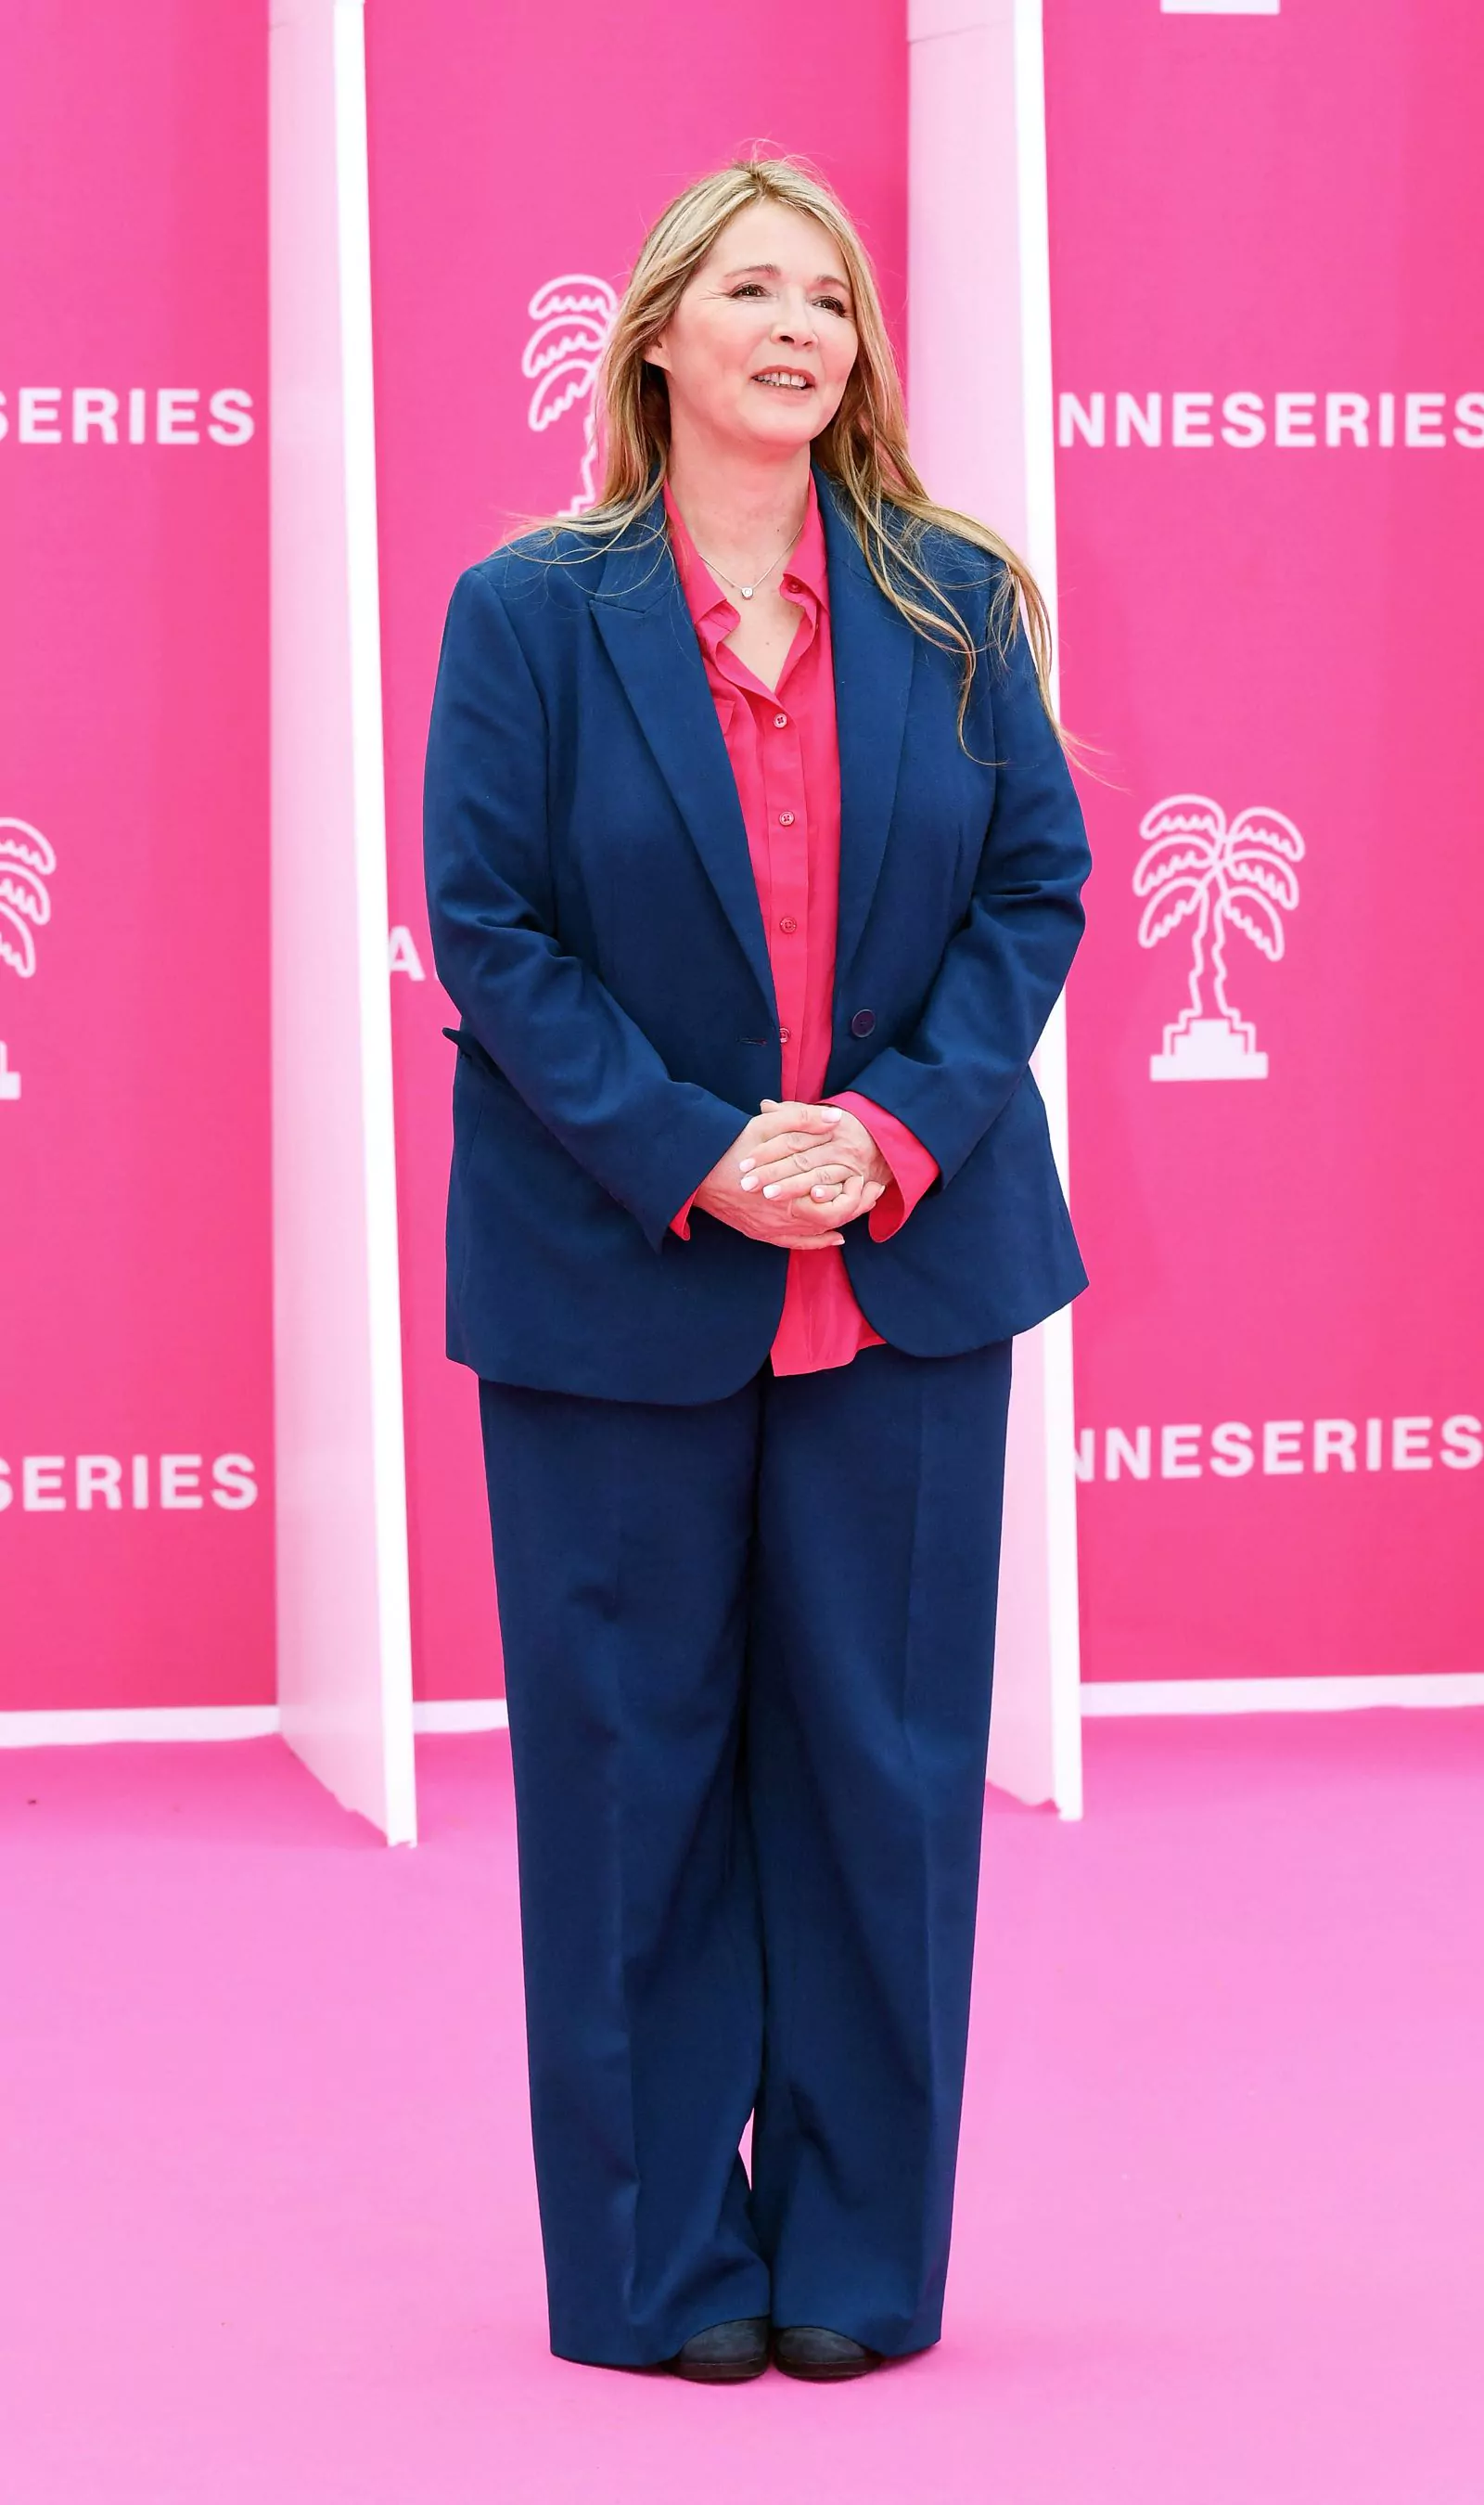 Hélène Rollet at the 6th International Festival of TV Series Canneseries 2023 in Cannes, April 14, 2023, photo 1